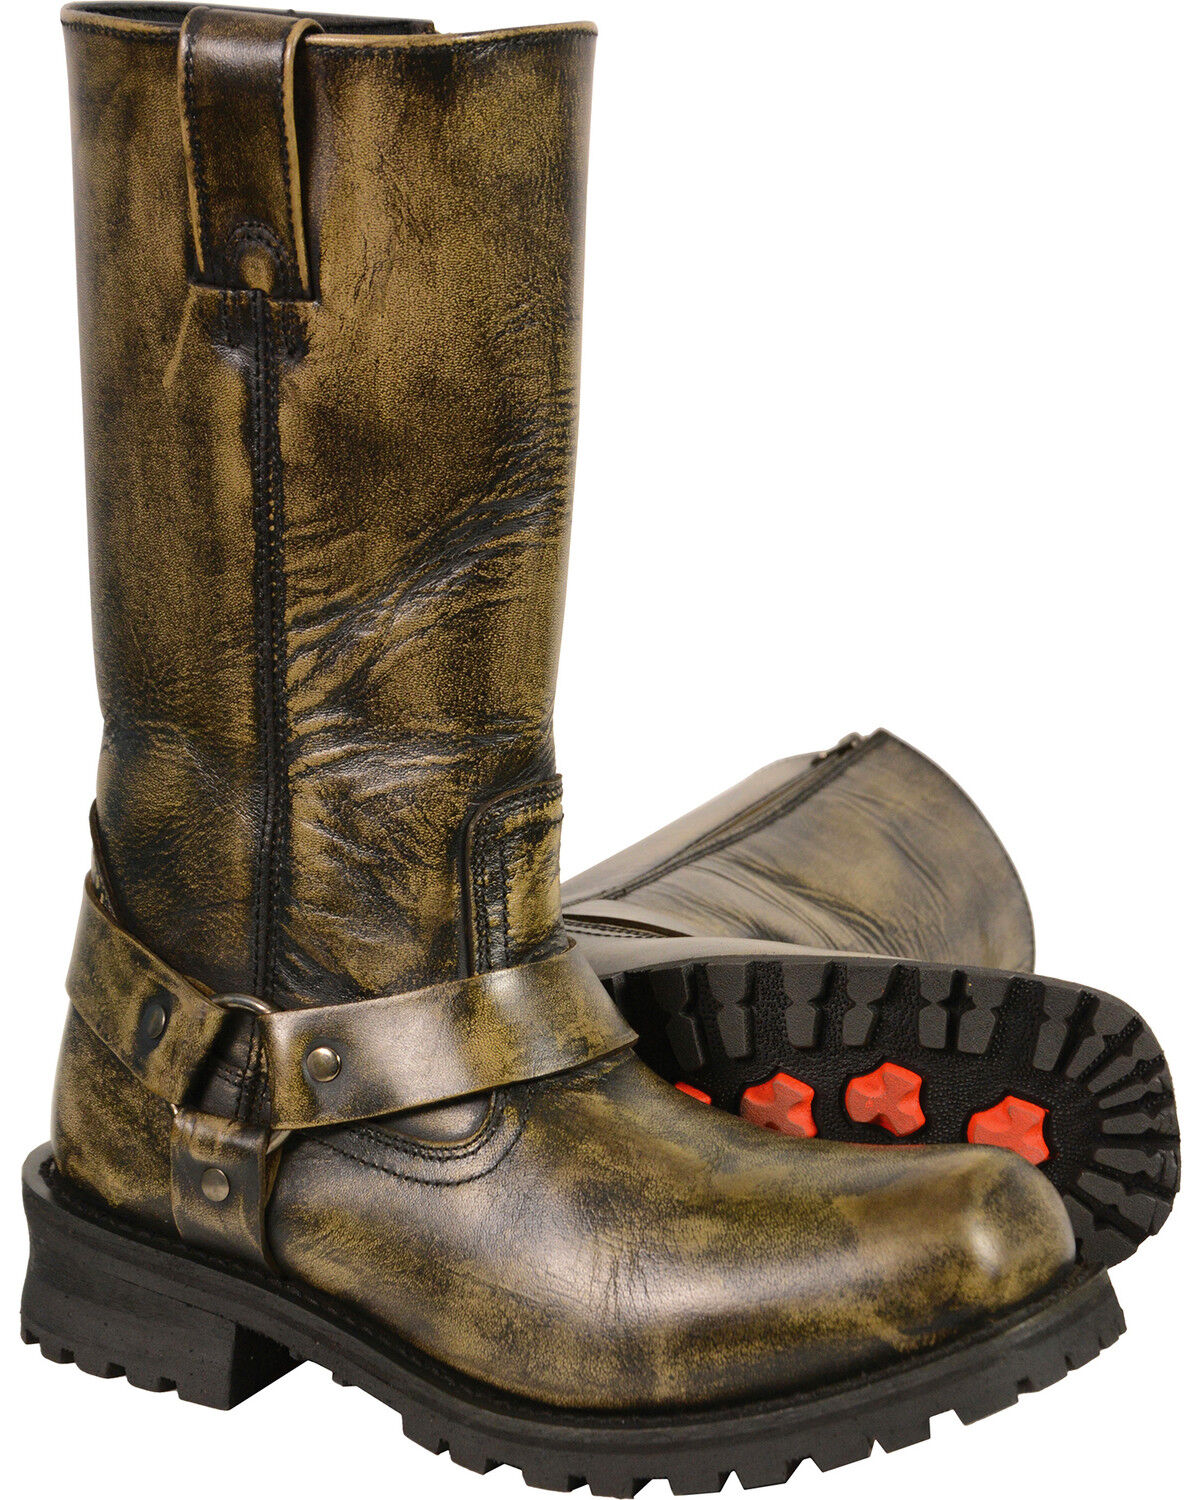 wide size motorcycle boots